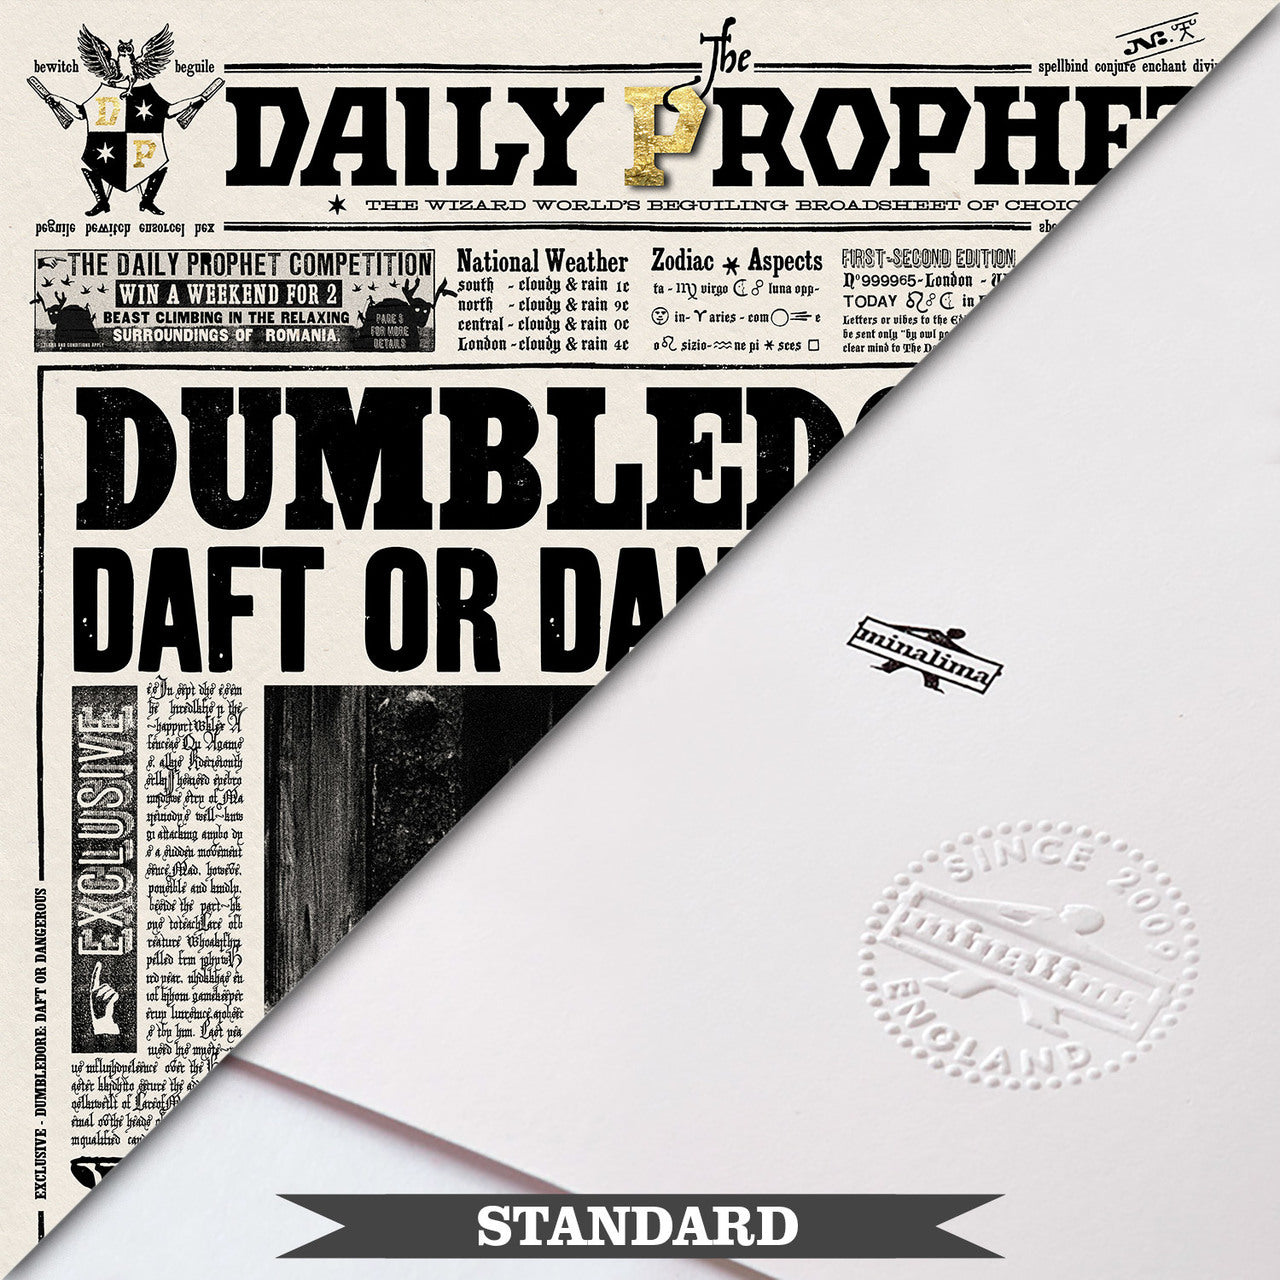 The Daily Prophet - Dumbledore: Daft or Dangerous? Limited Edition Art Print